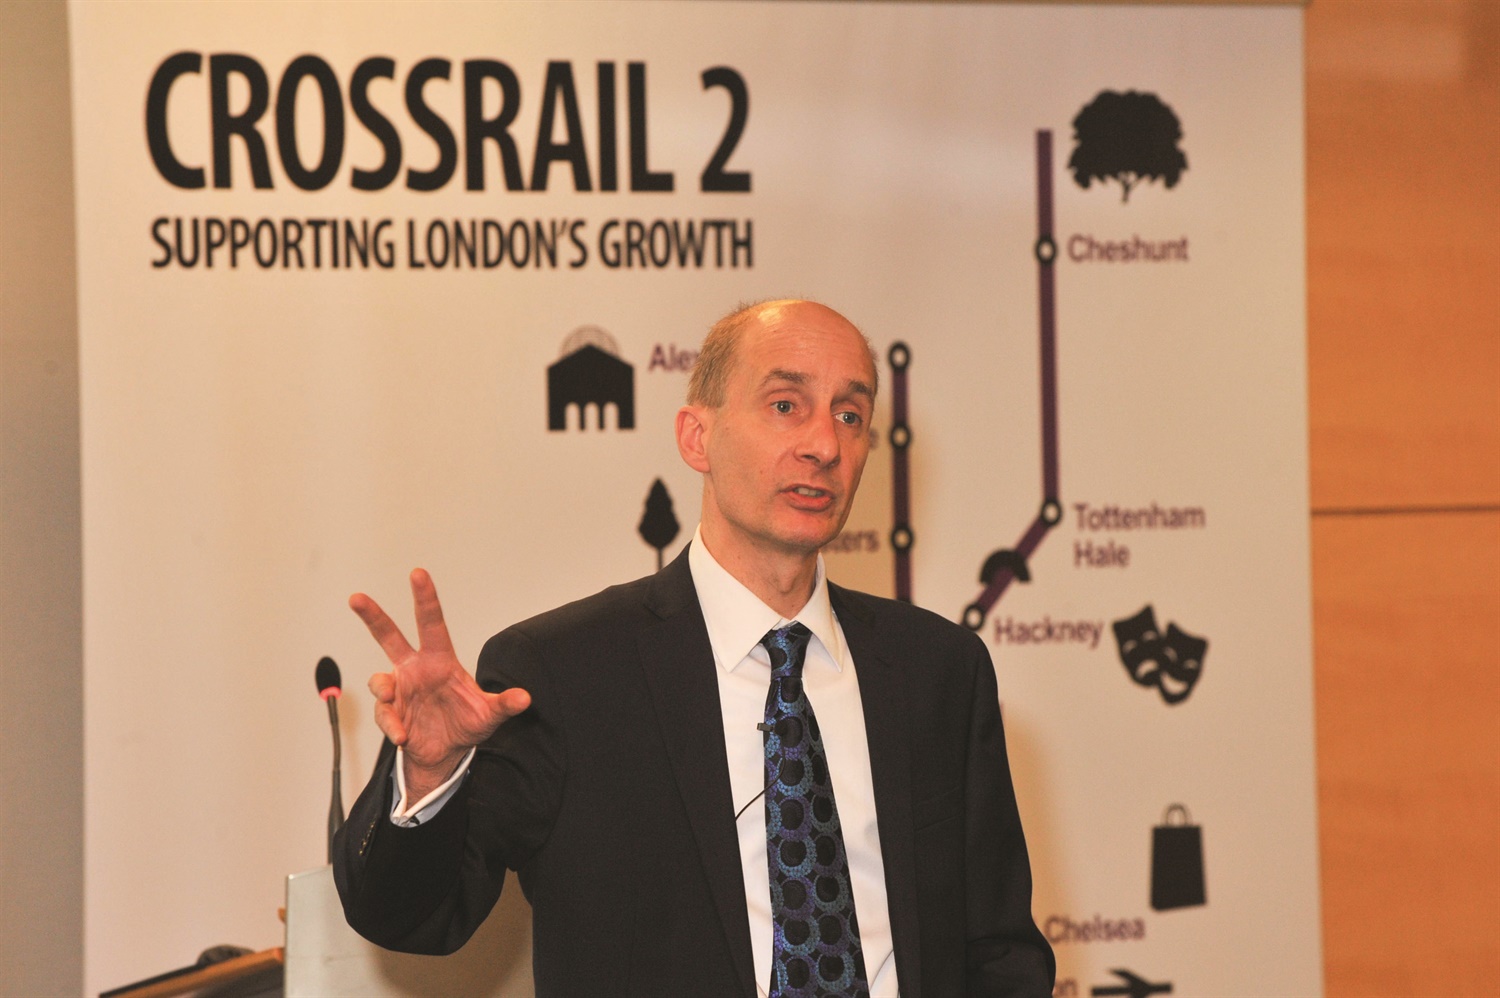 HS2 board member Lord Adonis to spearhead independent rail infrastructure commission